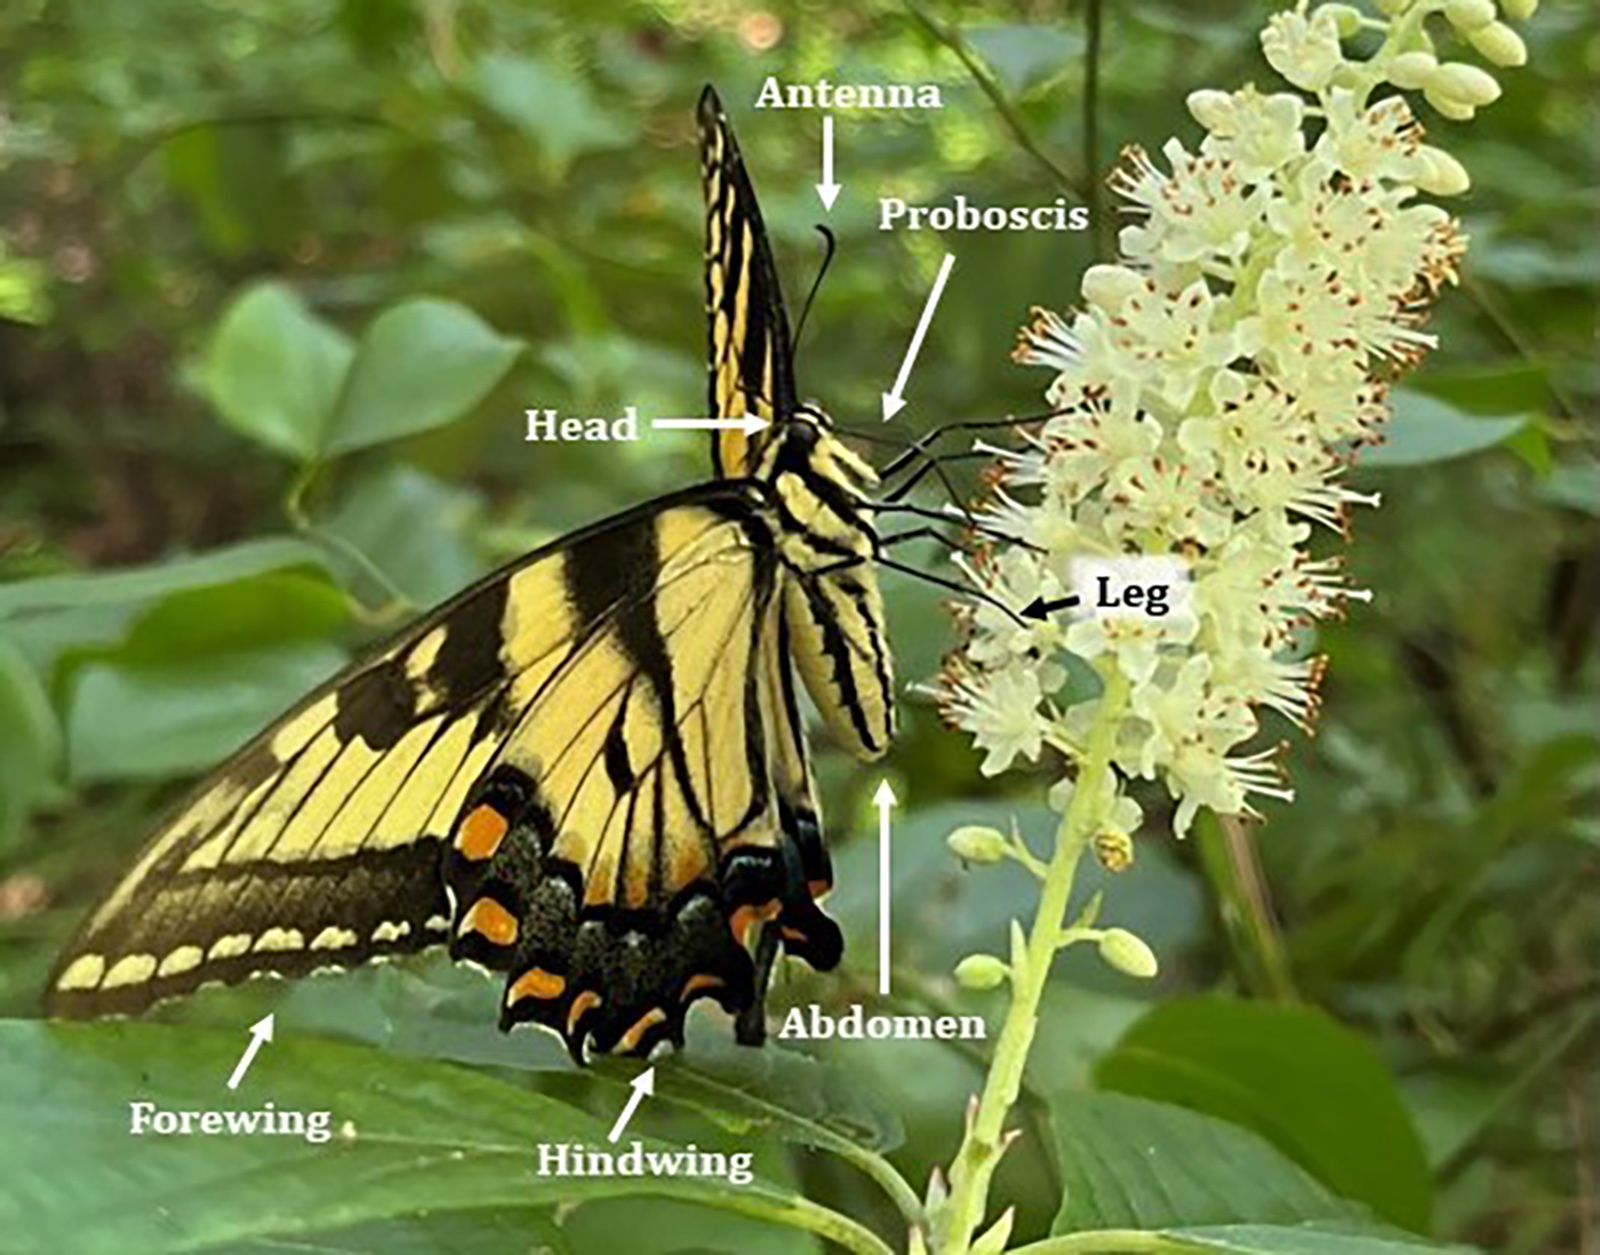 A photo of a butterfly with the anatomy - head, antenna, abdomen, etc. - labeled.